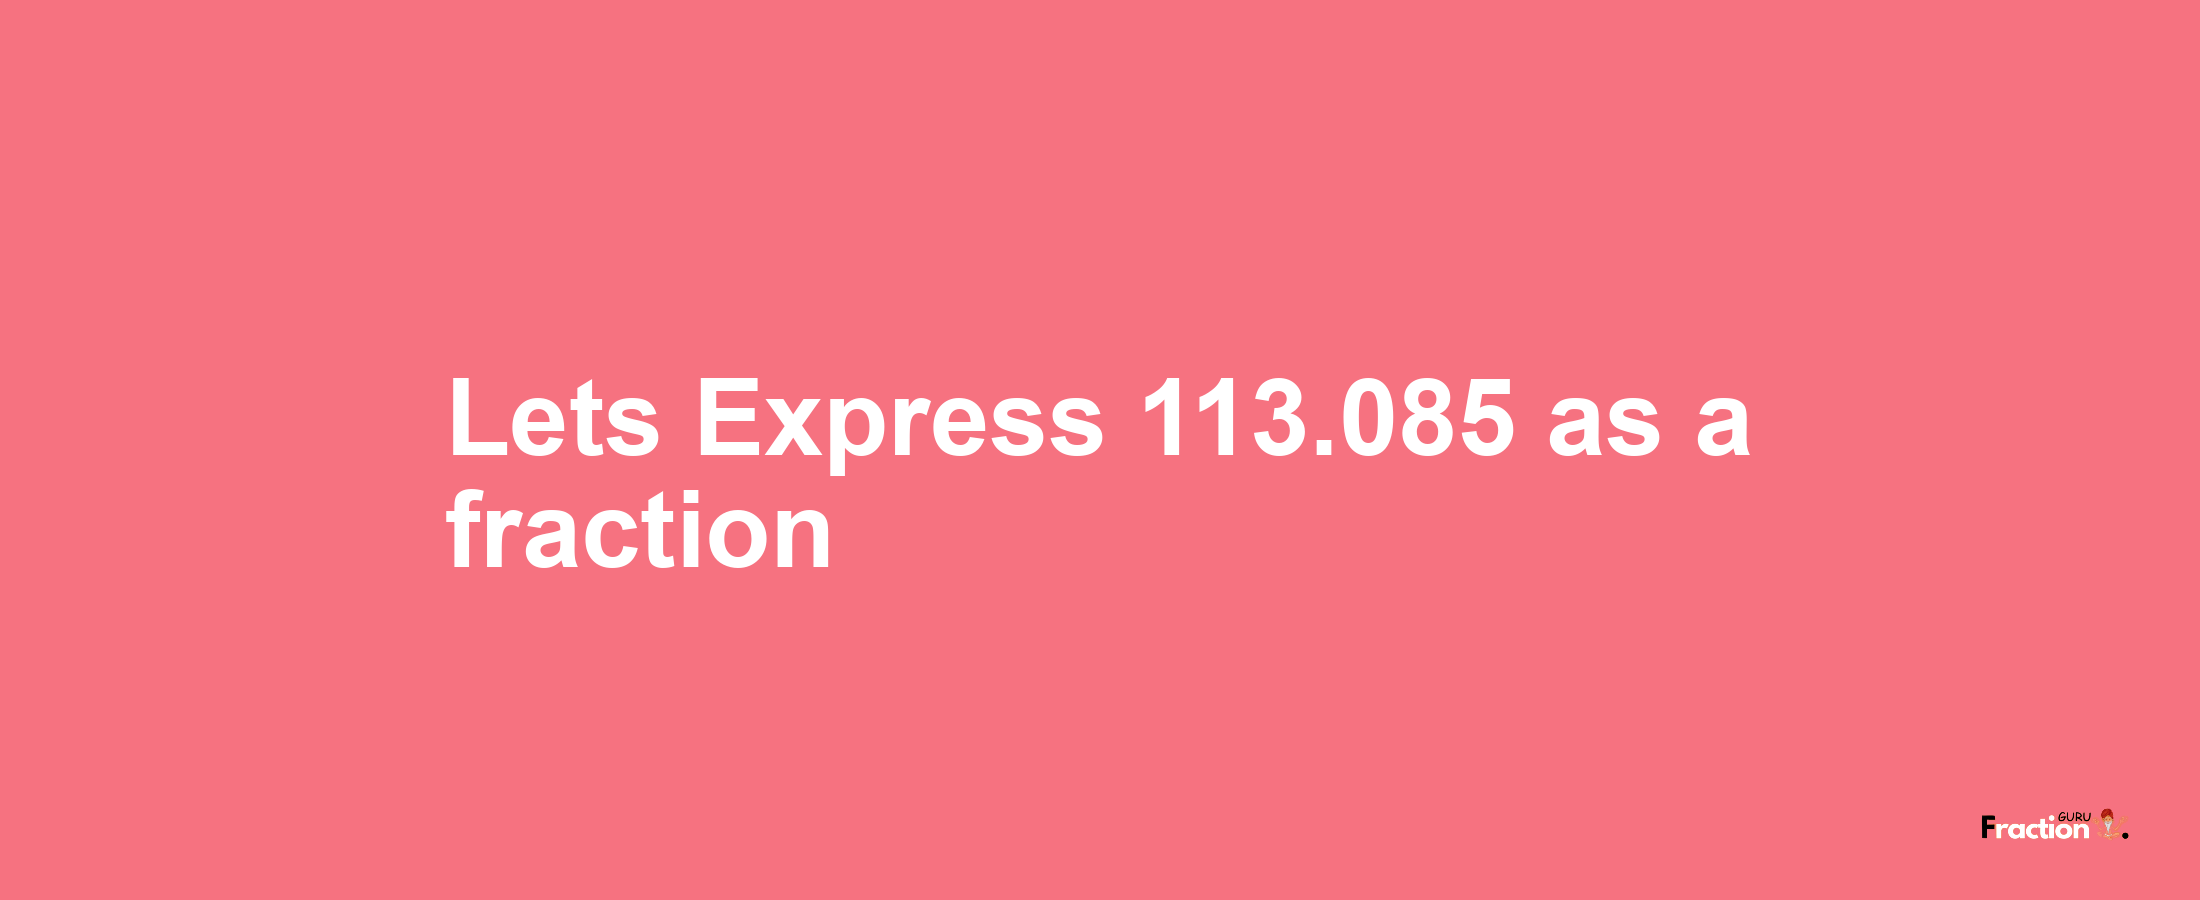 Lets Express 113.085 as afraction